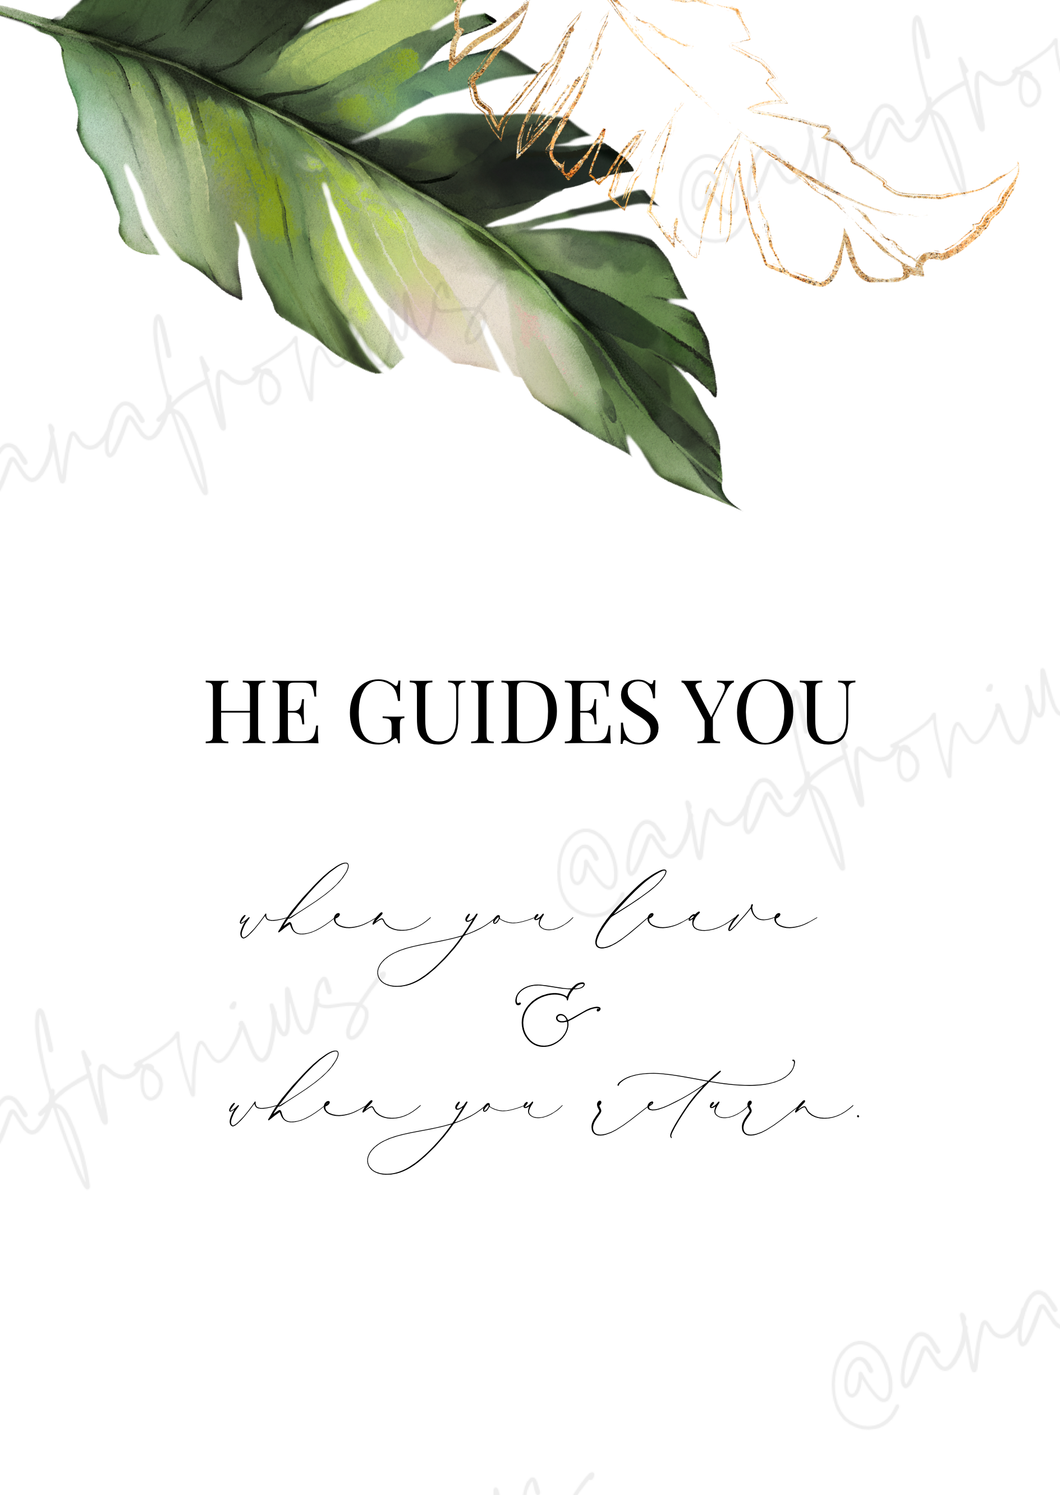 He guards you when you leave and when you return Printable